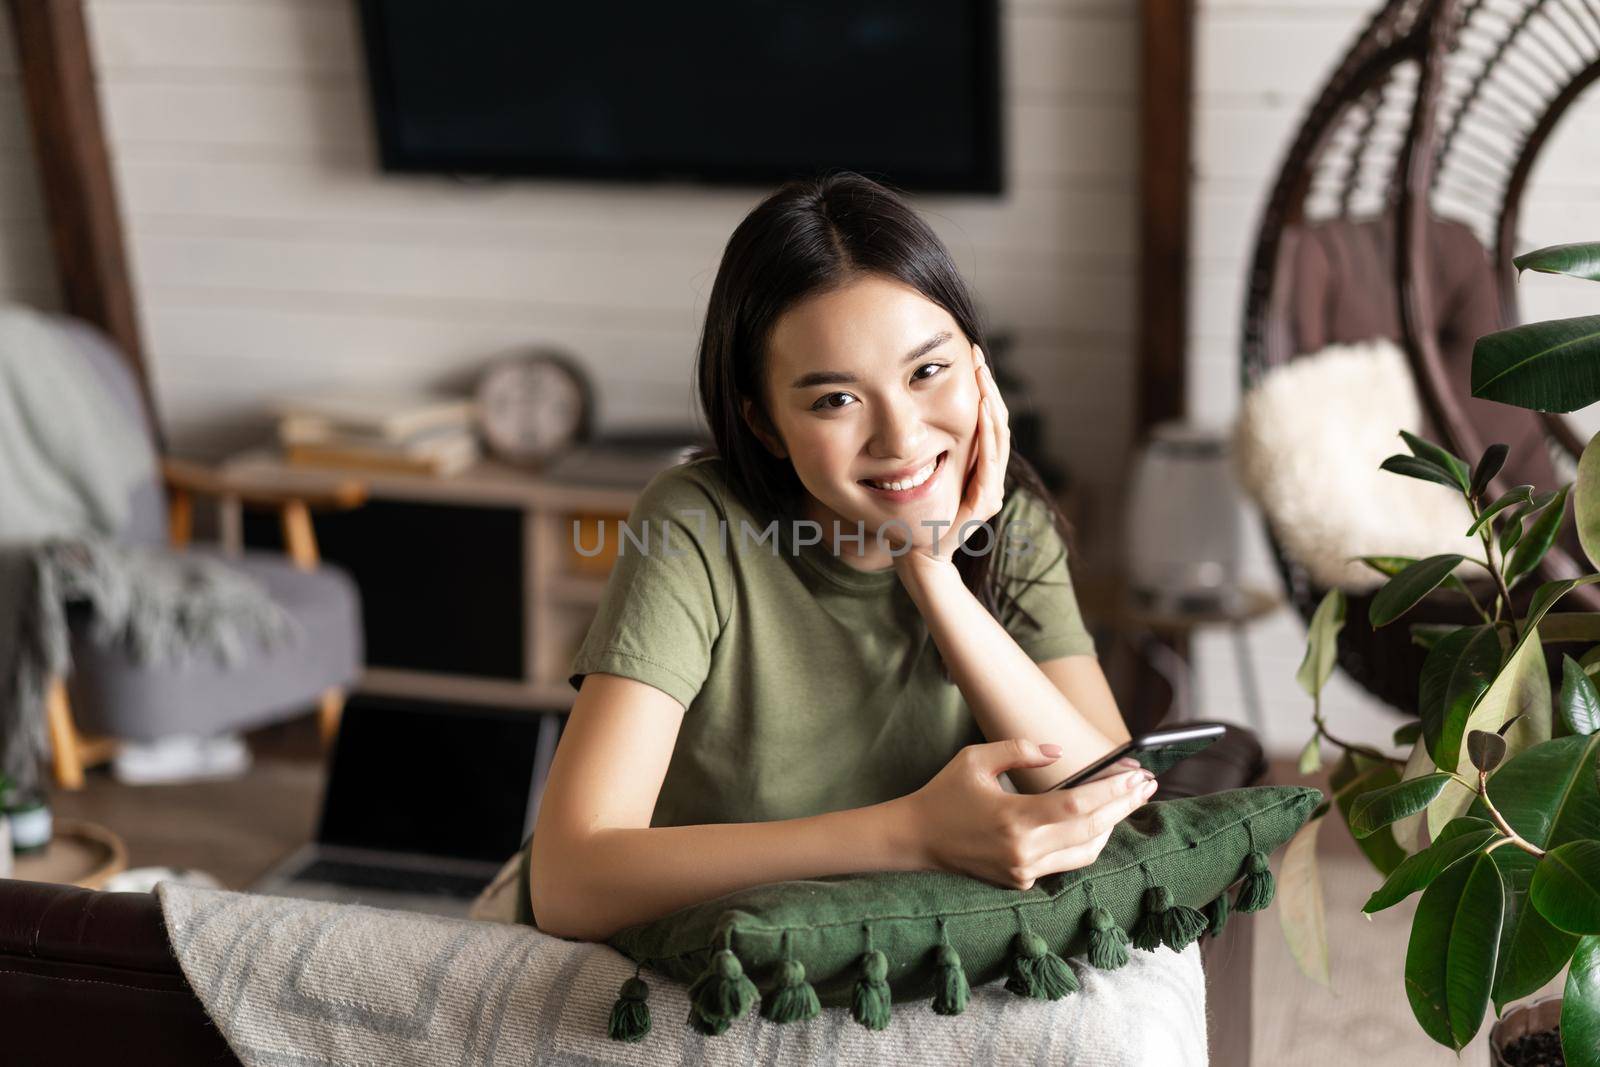 Smiling korean girl enjoying her weekend at home, resting at home on sofa, using mobile phone application, waiting for meal delivery.